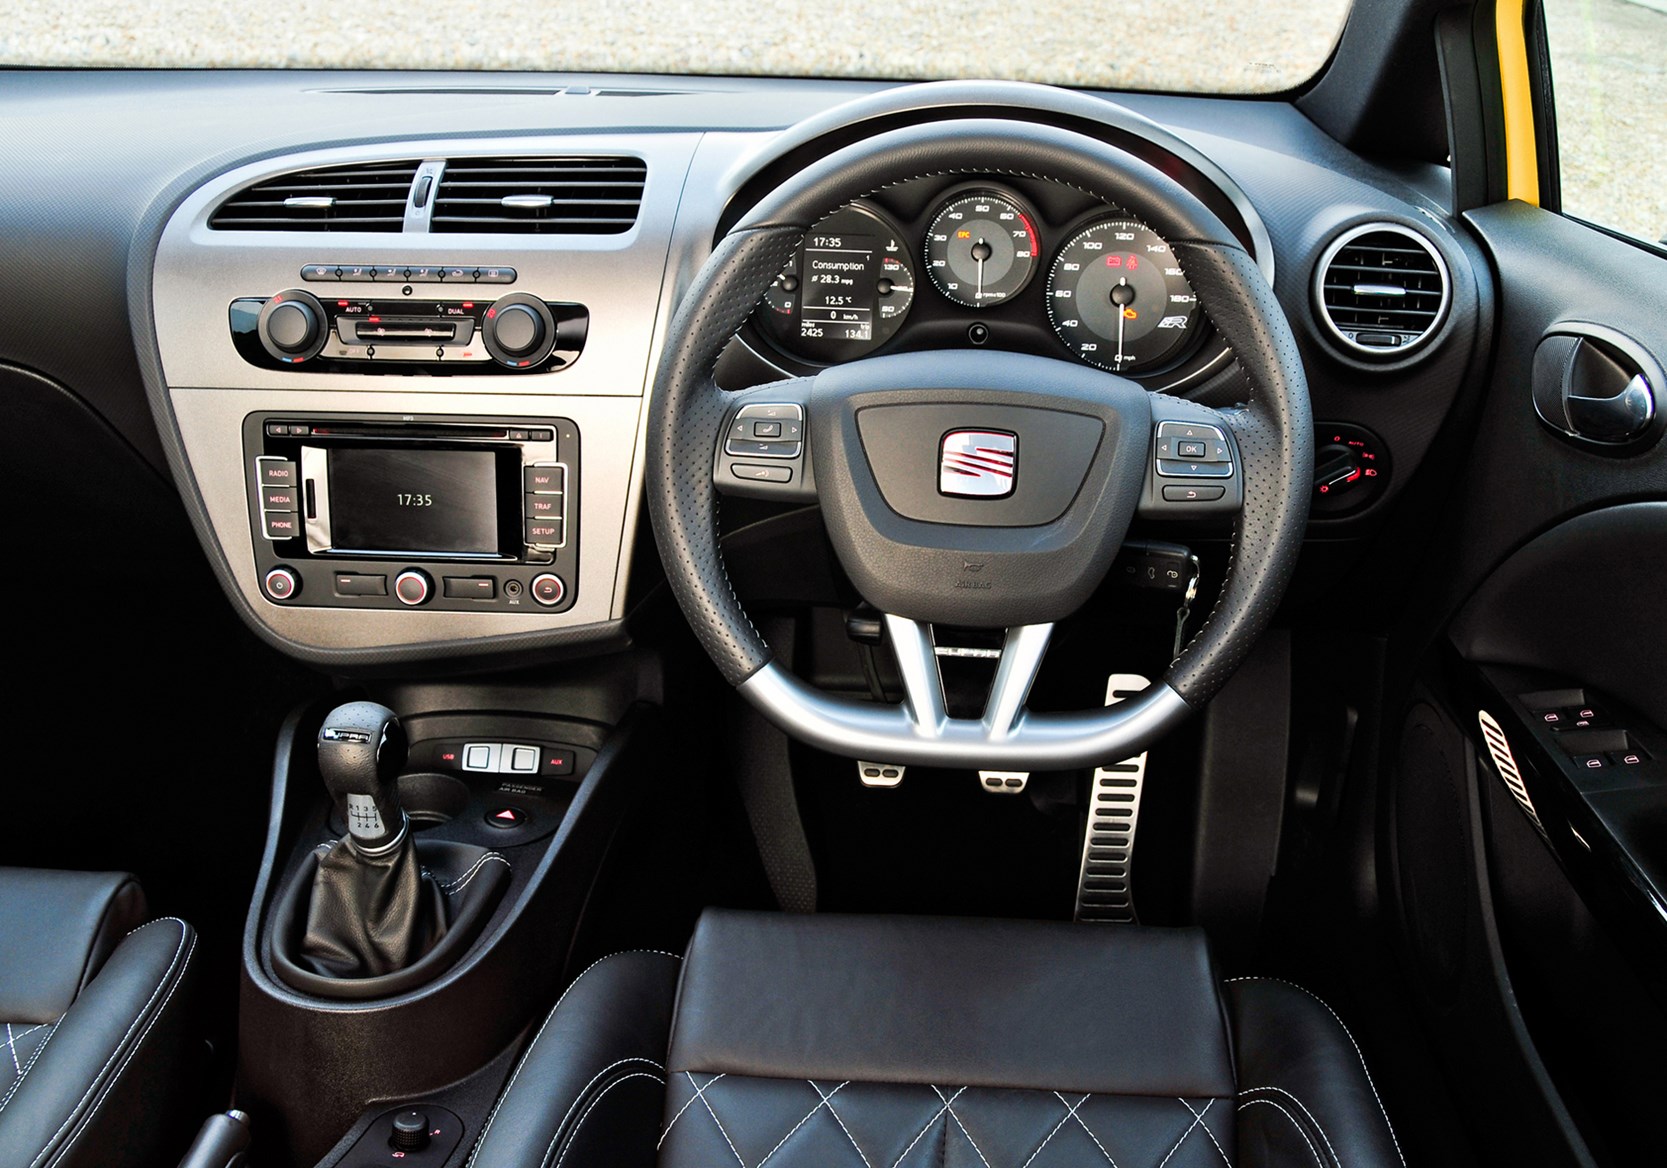 Intention move on Prophet Used SEAT Leon Cupra R (2010 - 2012) interior, tech and comfort | Parkers